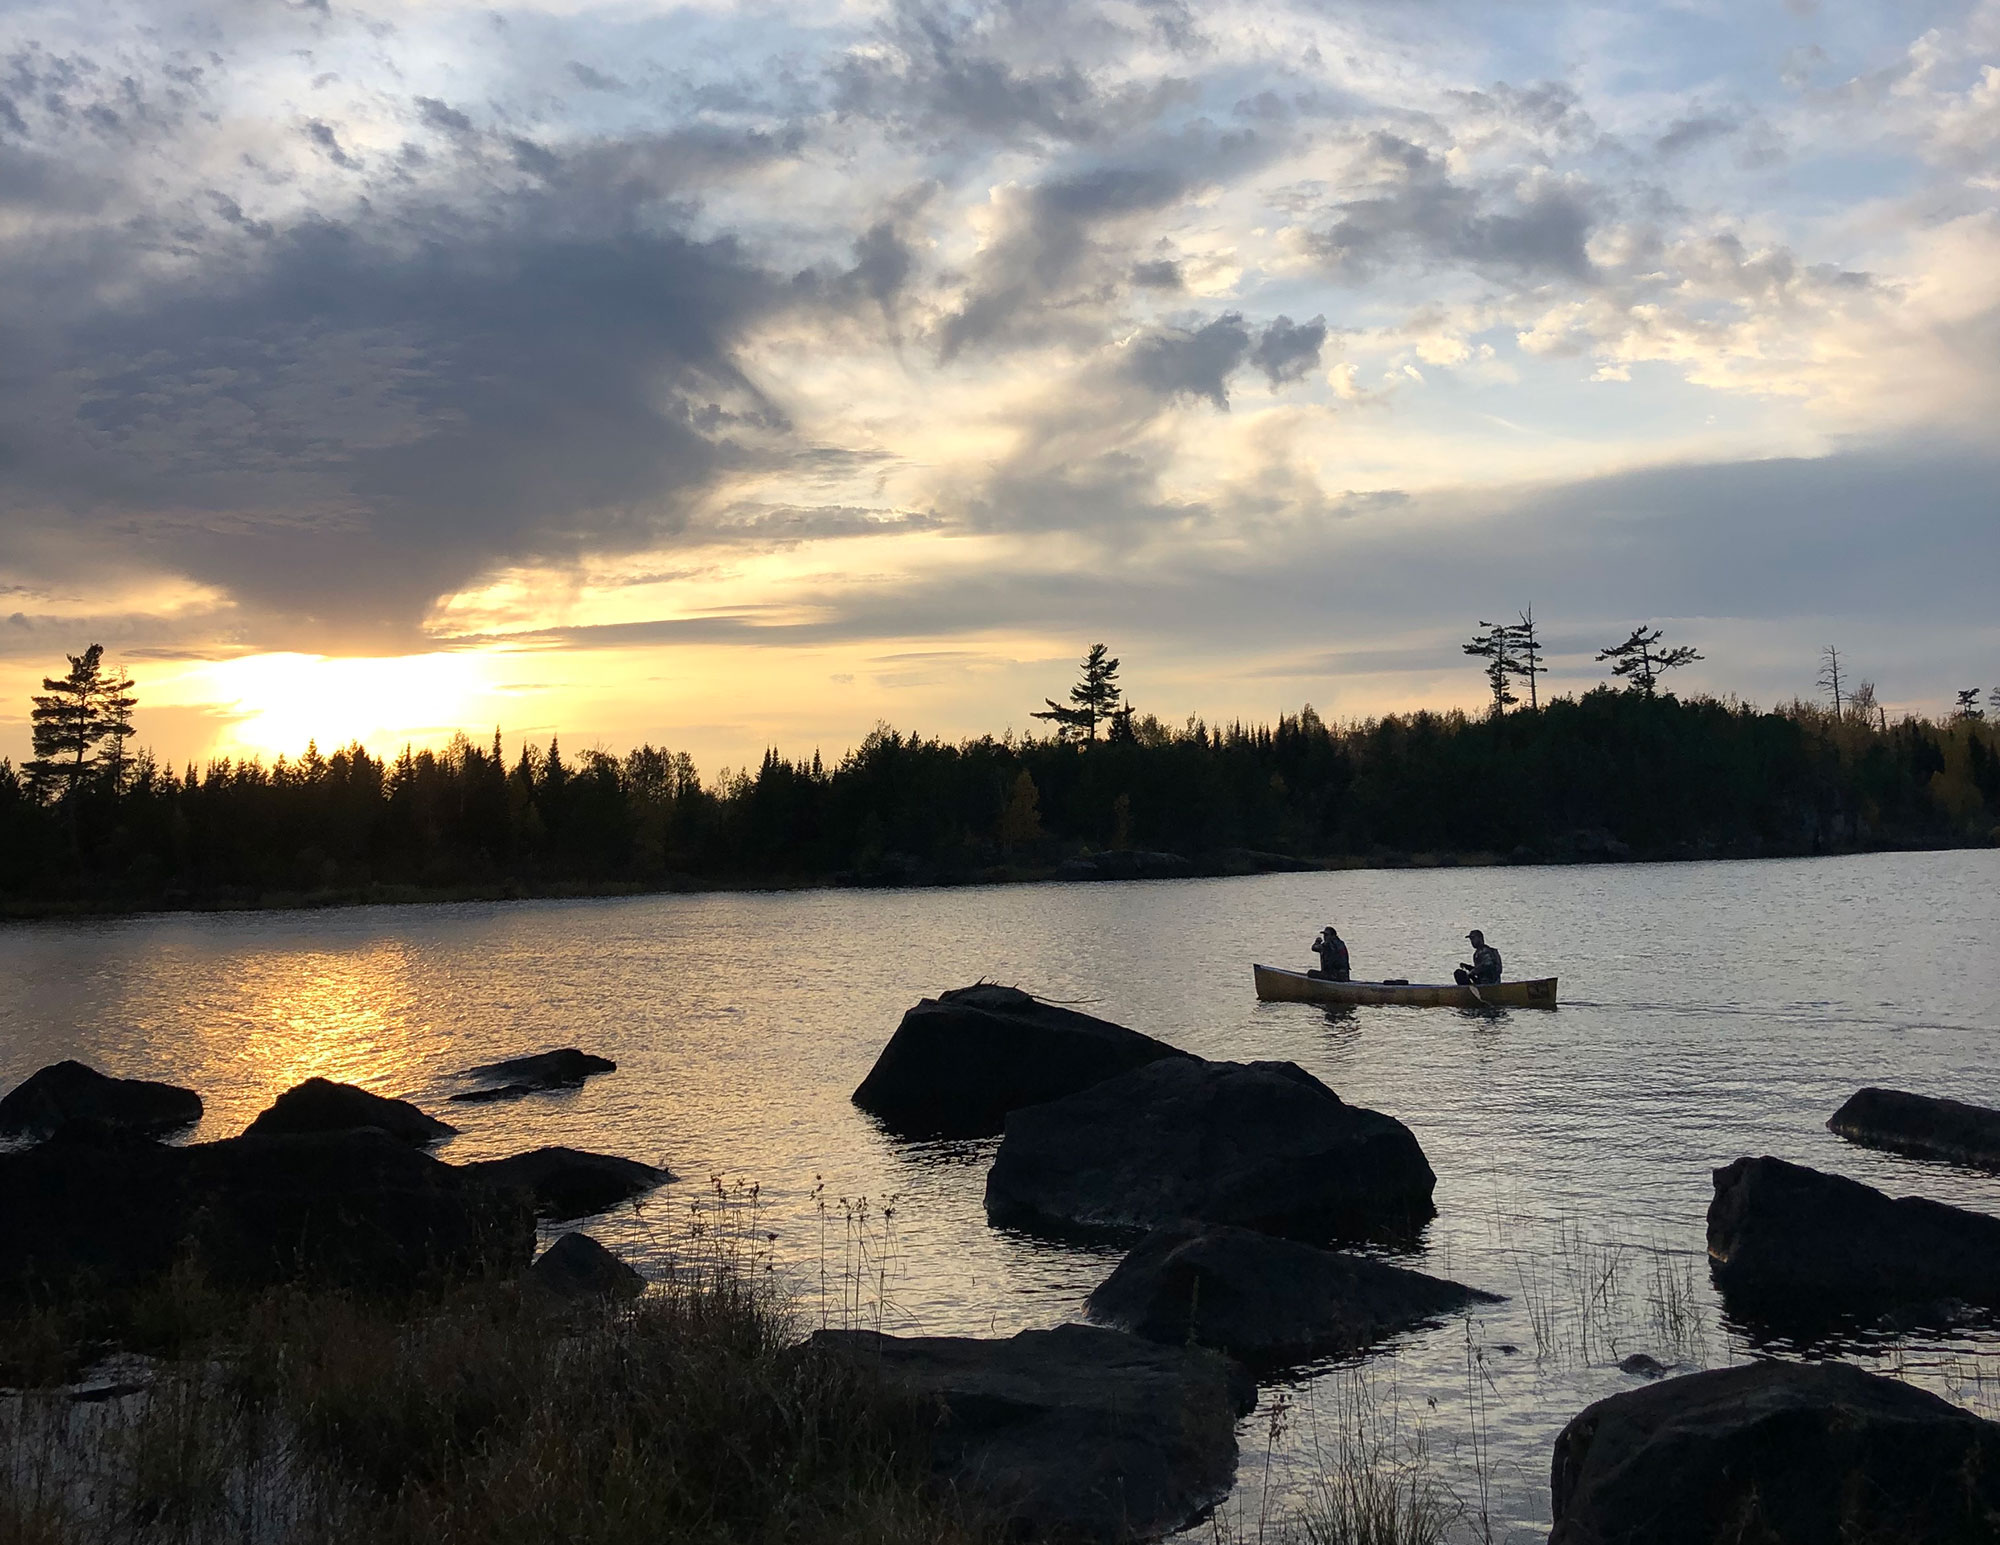 The Boundary Waters sees thousands of visitors each year and has an economic impact of $77 million per year. 